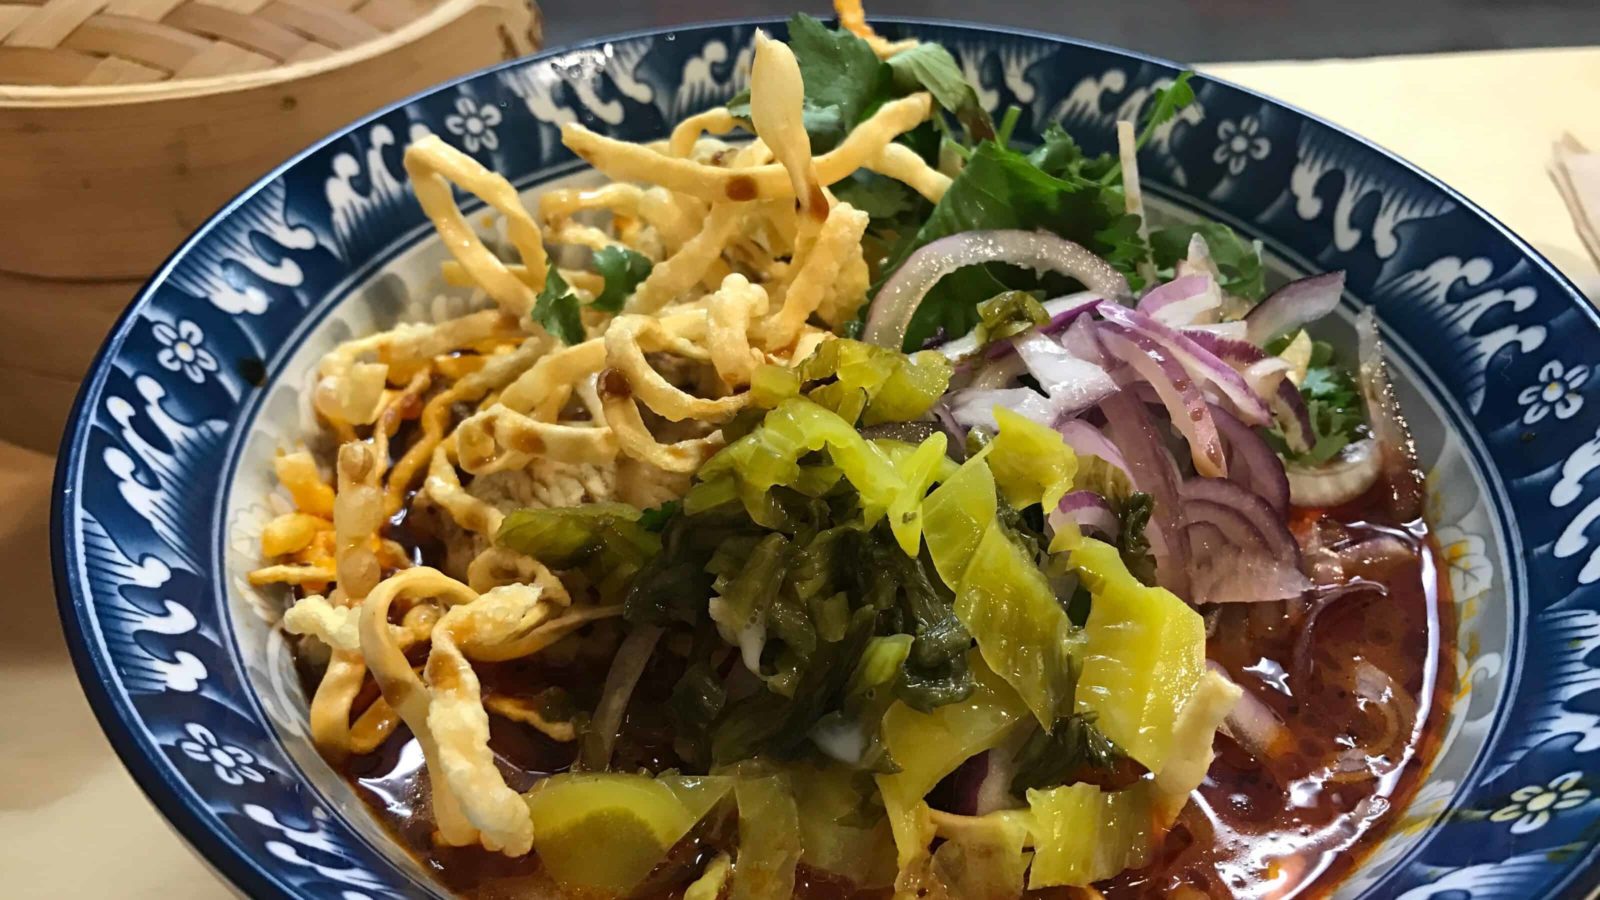 Steam Noodle Cafe in Great Barrington offers soups, steamed buns and other Asian comfort foods.